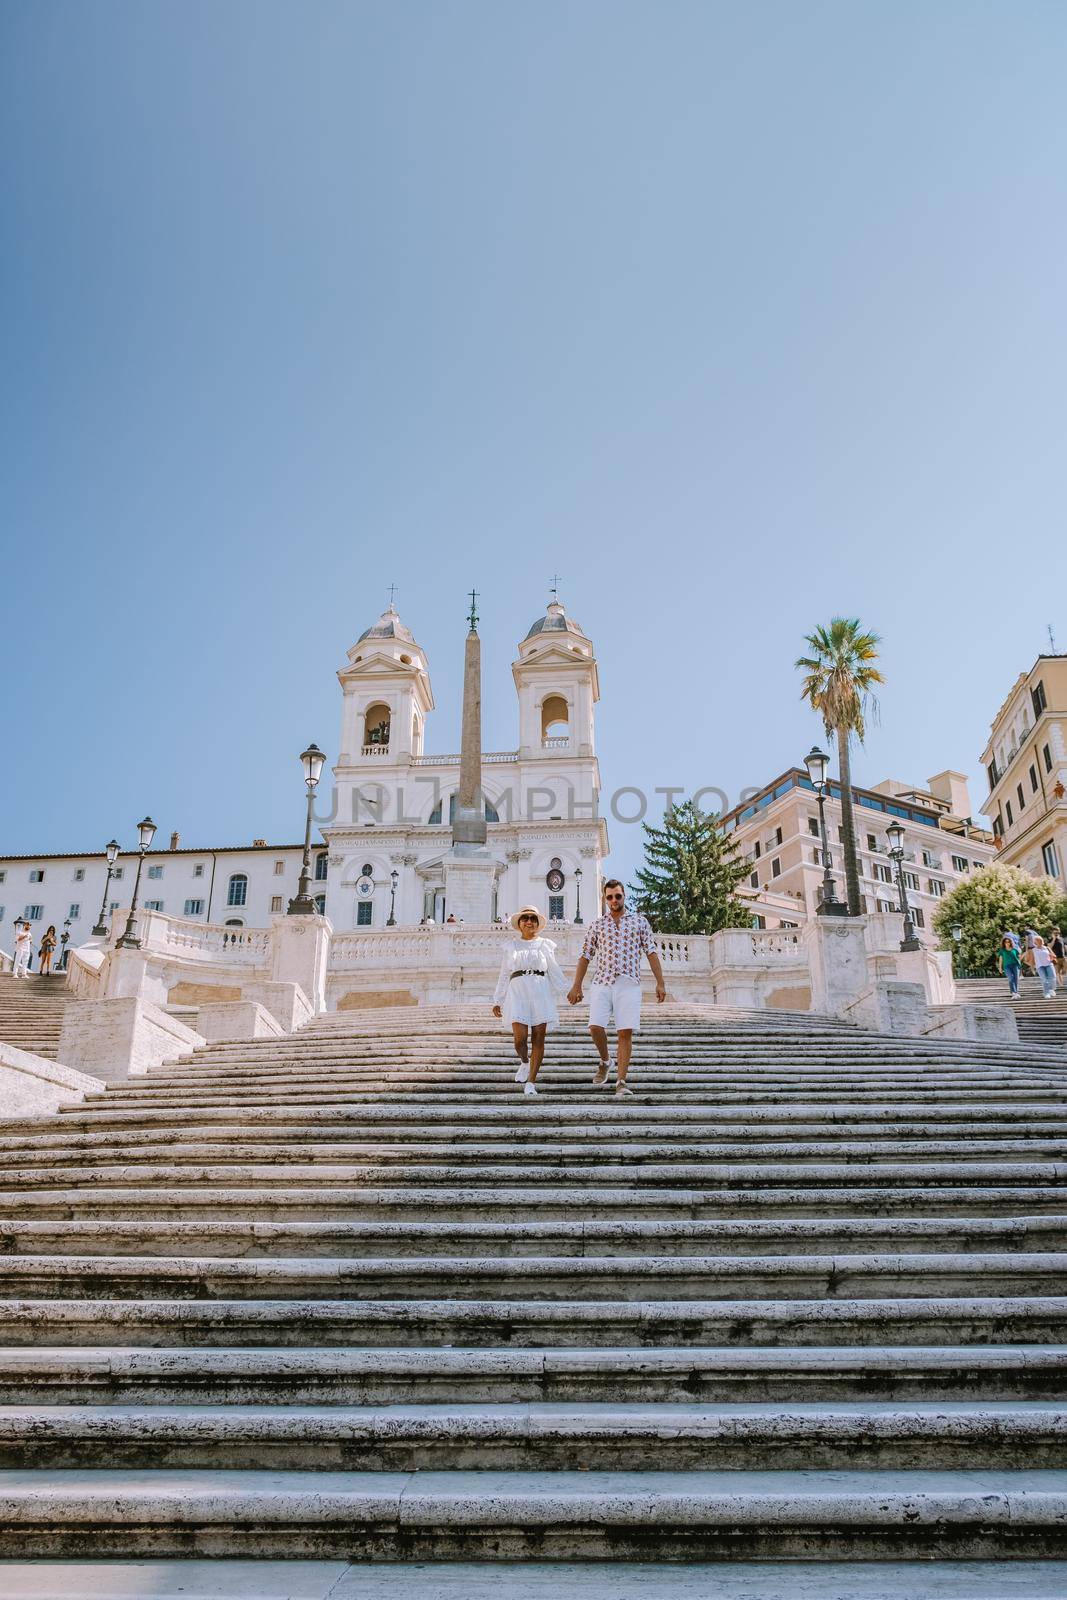 Rome September 2020, The Spanish Steps in Rome, Italy. The famous place is a great example of Roman Baroque Style with people with mouth protection during the covid 19 outbreak by fokkebok